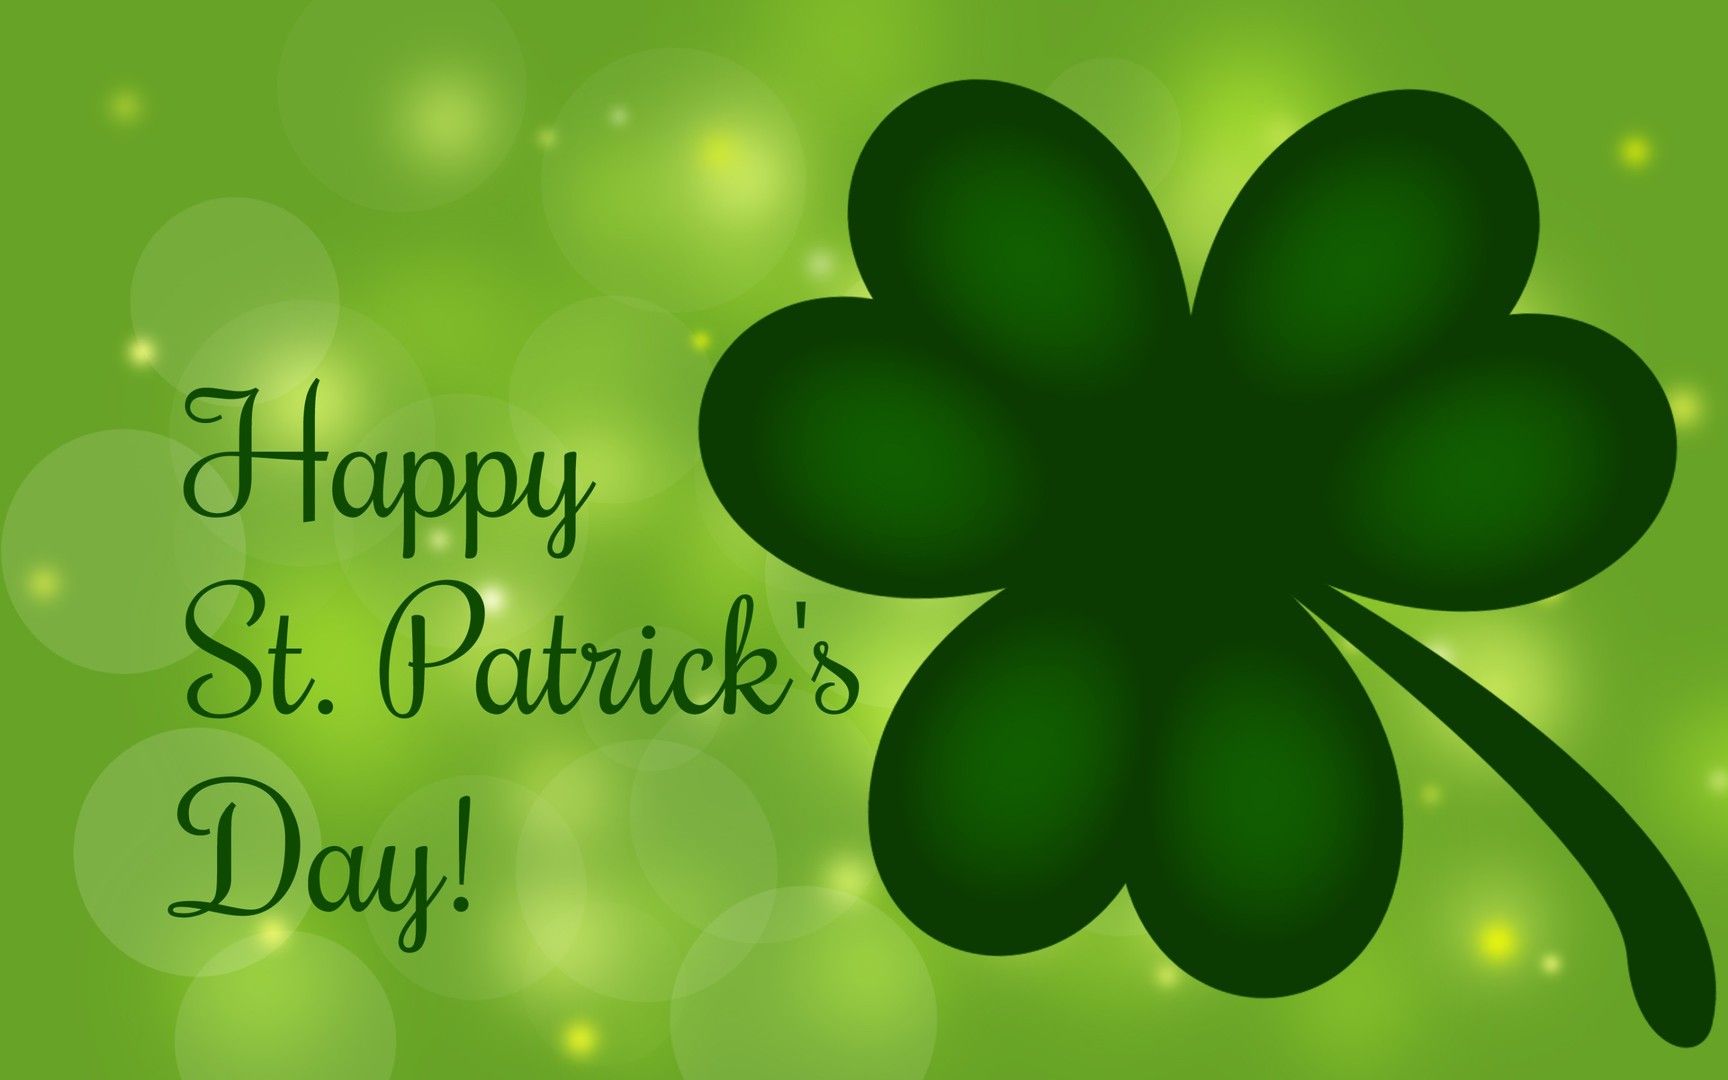 Happy St Patricks Day Image, Quotes, Wishes, Messages 2021